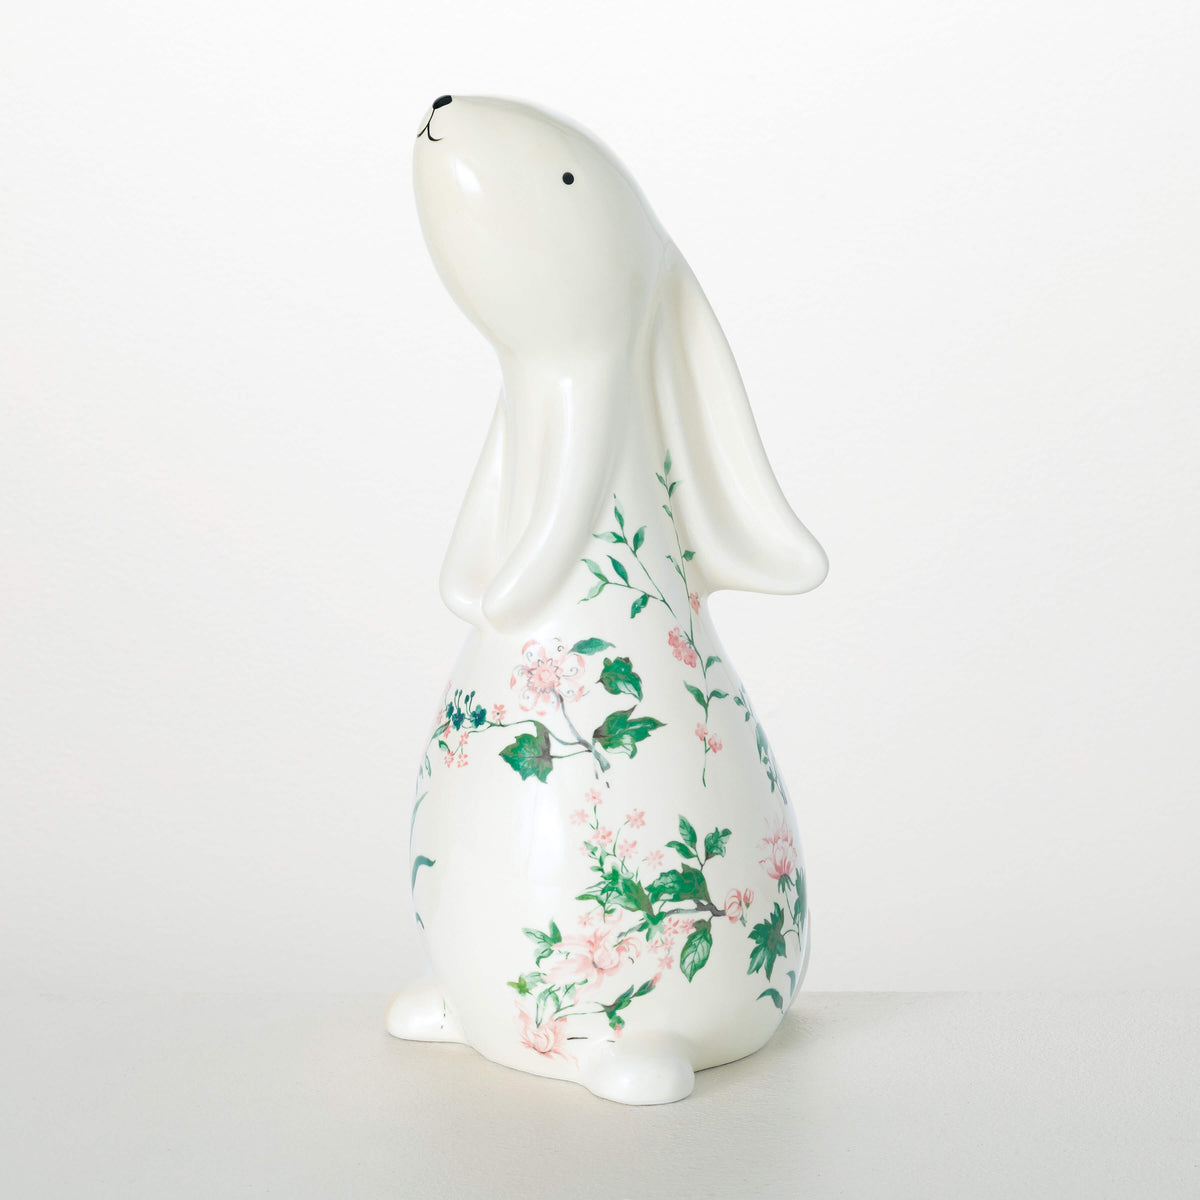 Peacock &amp; Floral Bunny Figure - Zinnias Gift Boutique